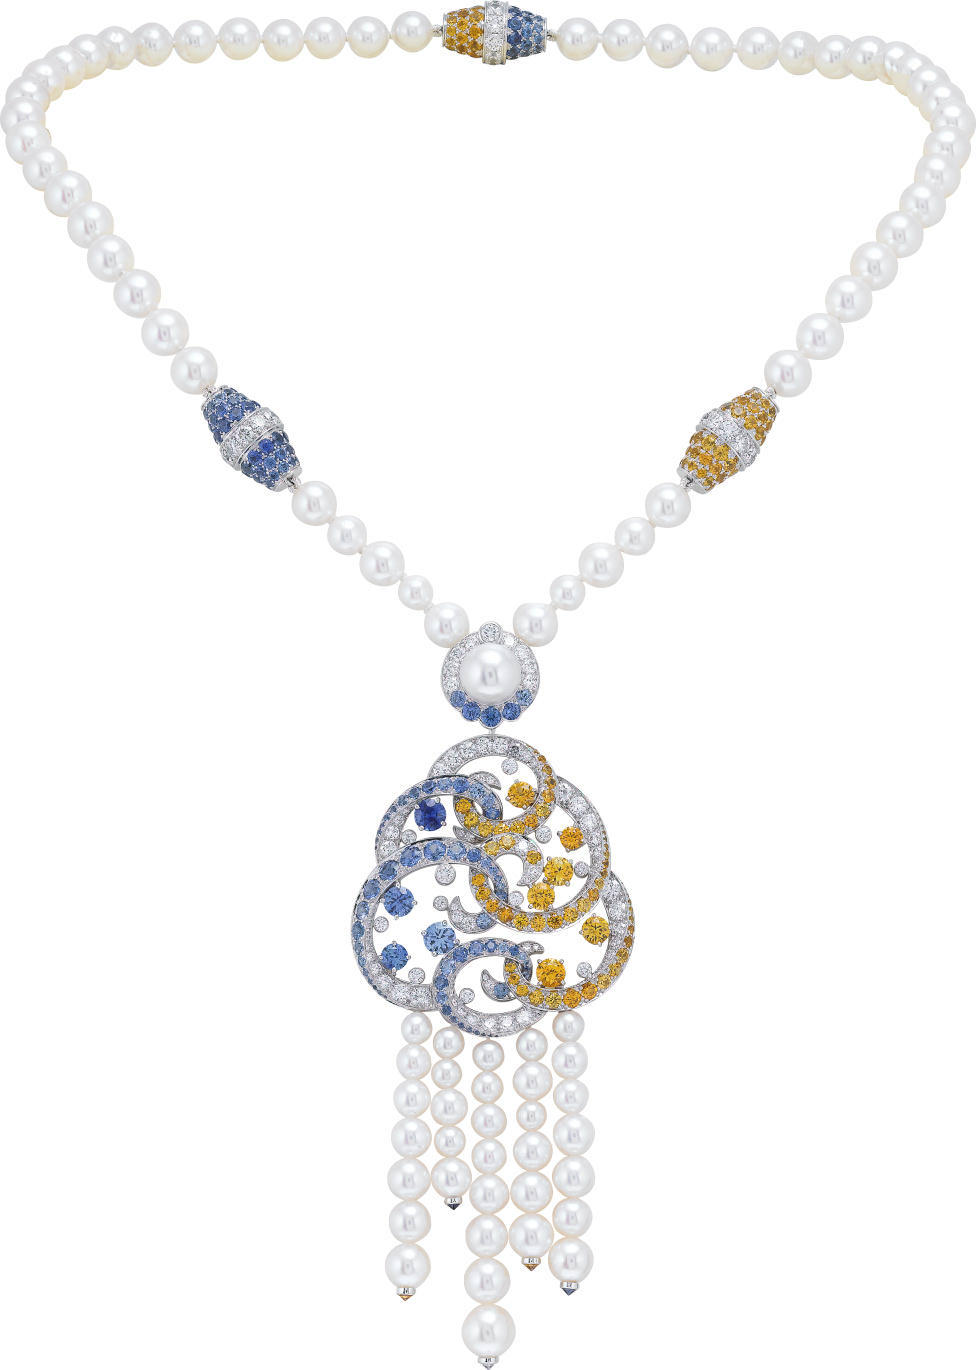 Van Cleef &amp; ArpelsThe Benguerra long necklace in white gold is set with diamonds, blue and yellow sapphires, spessartite garnets and white cultured pearls. The piece can be modified to become a choker. Price on request